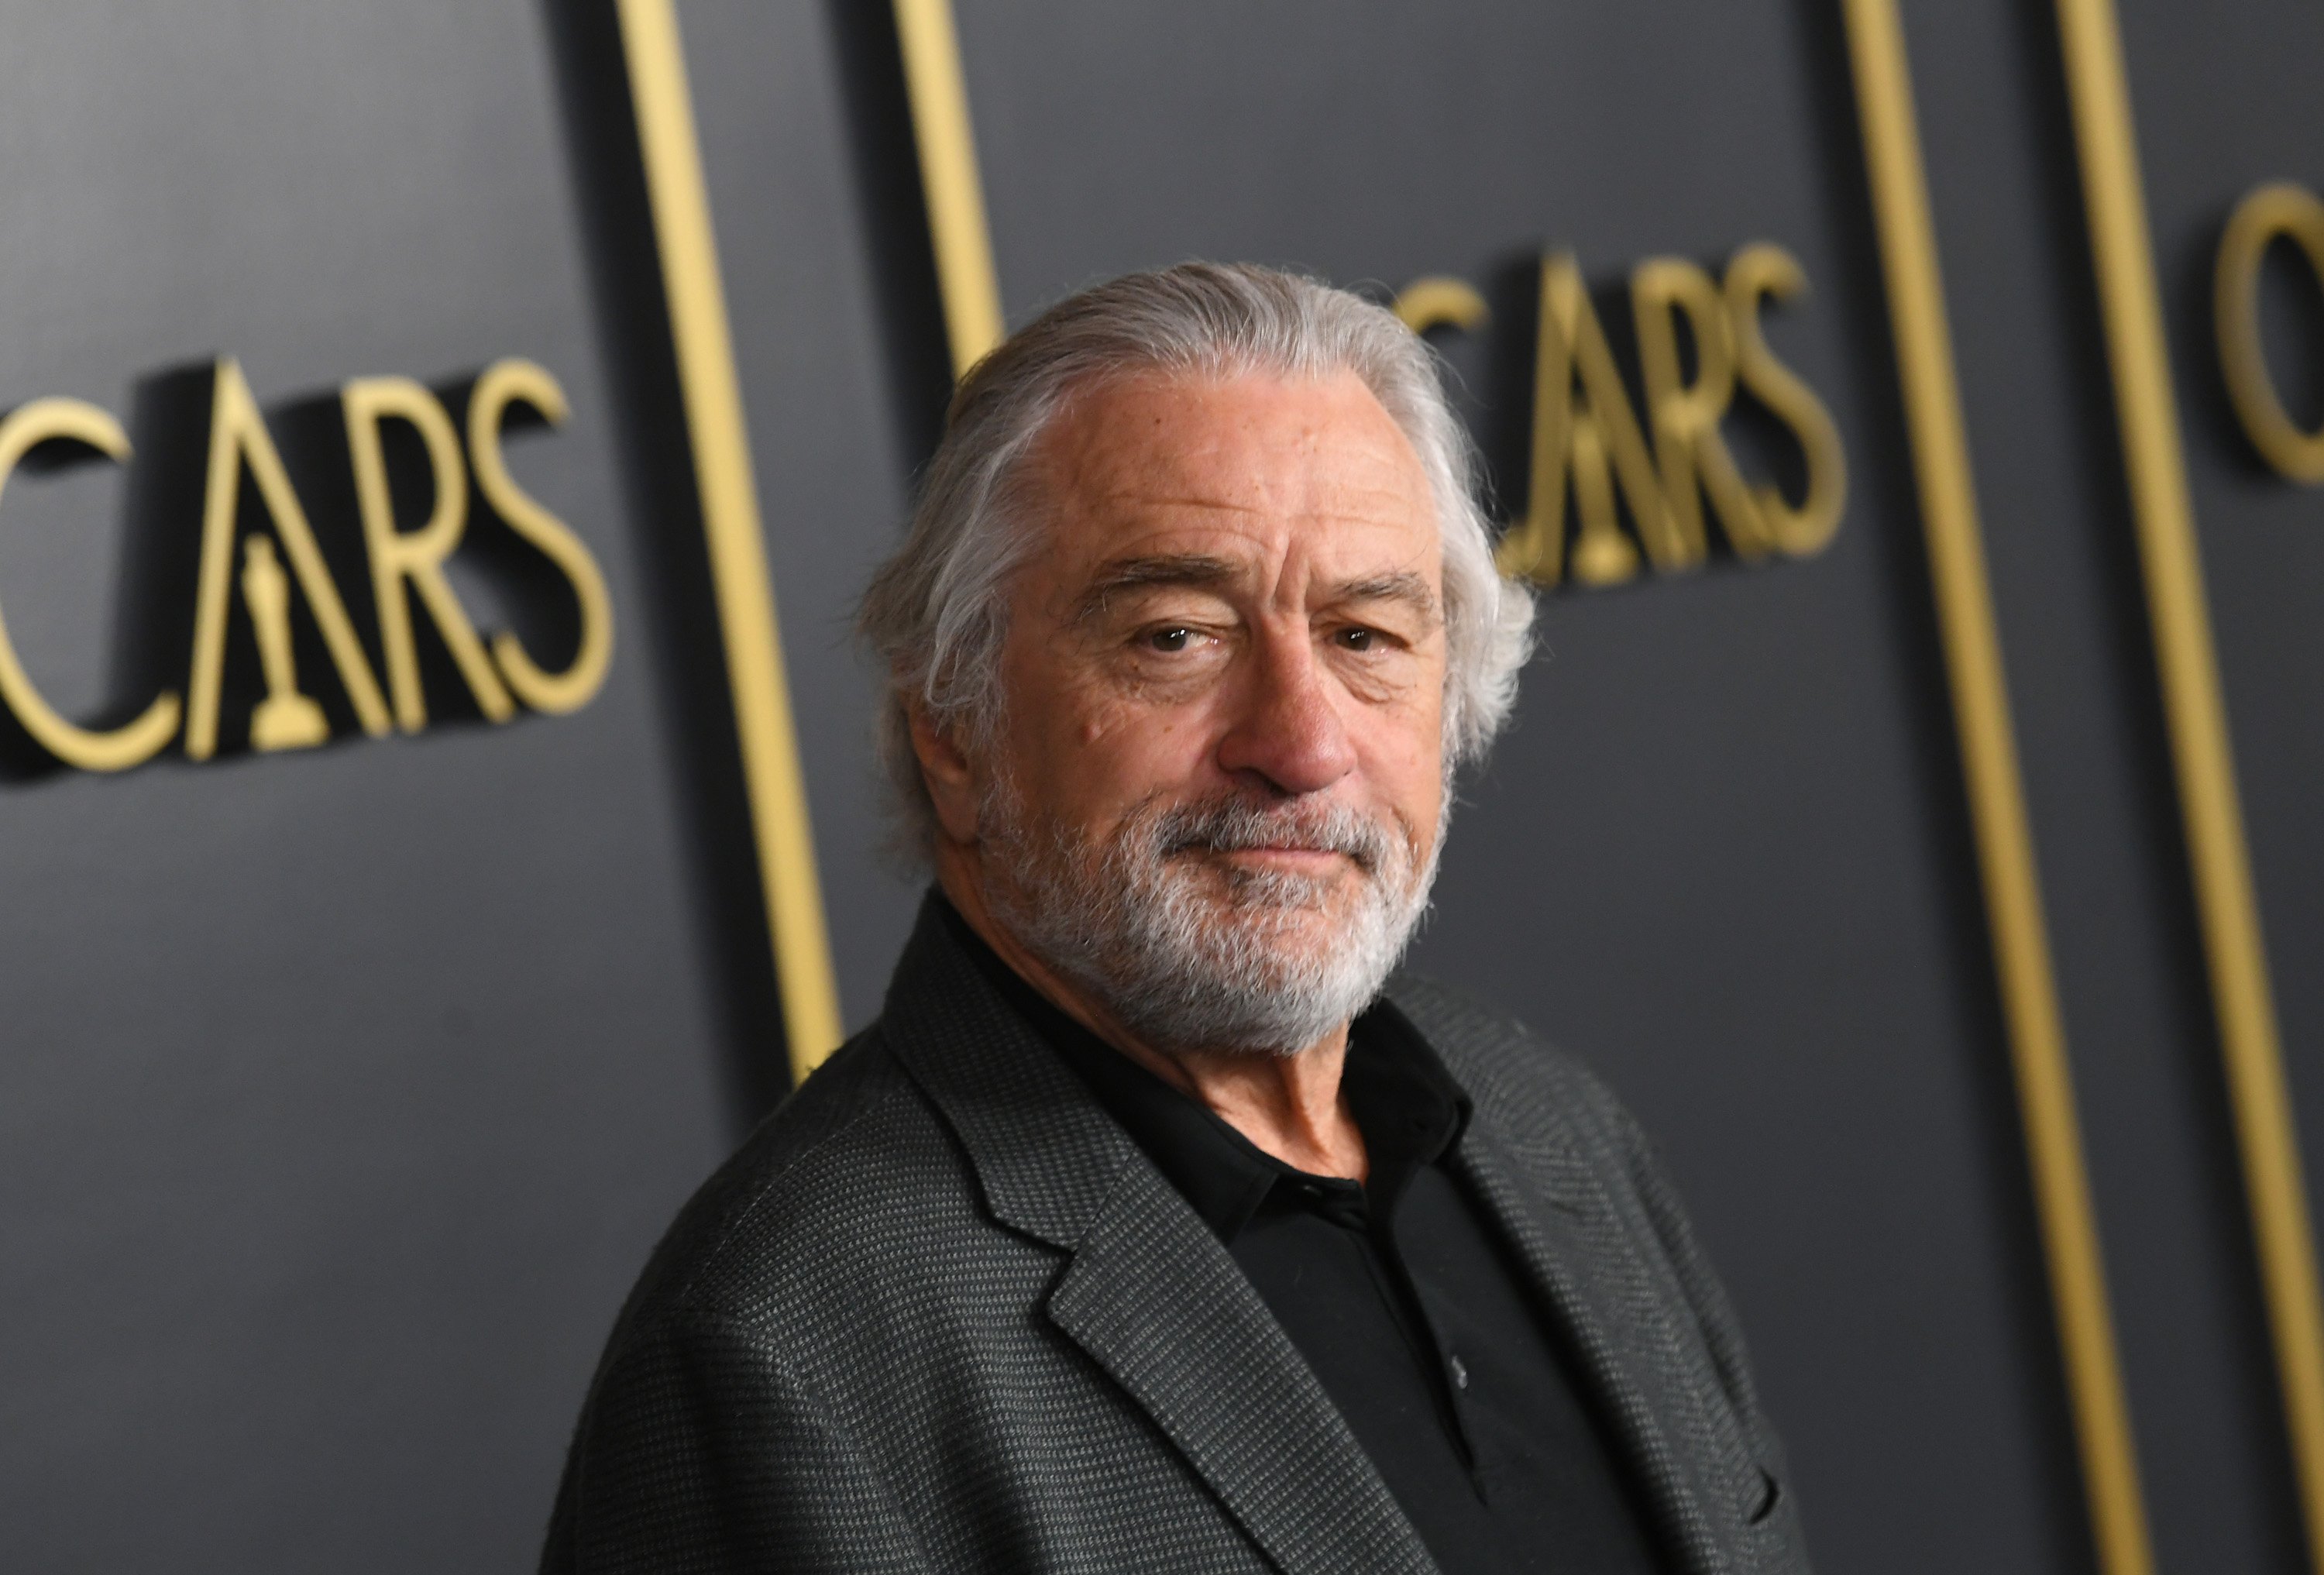 Robert De Niro during the 92nd Oscars Nominees Luncheon on January 27, 2020 in Hollywood, California. / Source: Getty Images